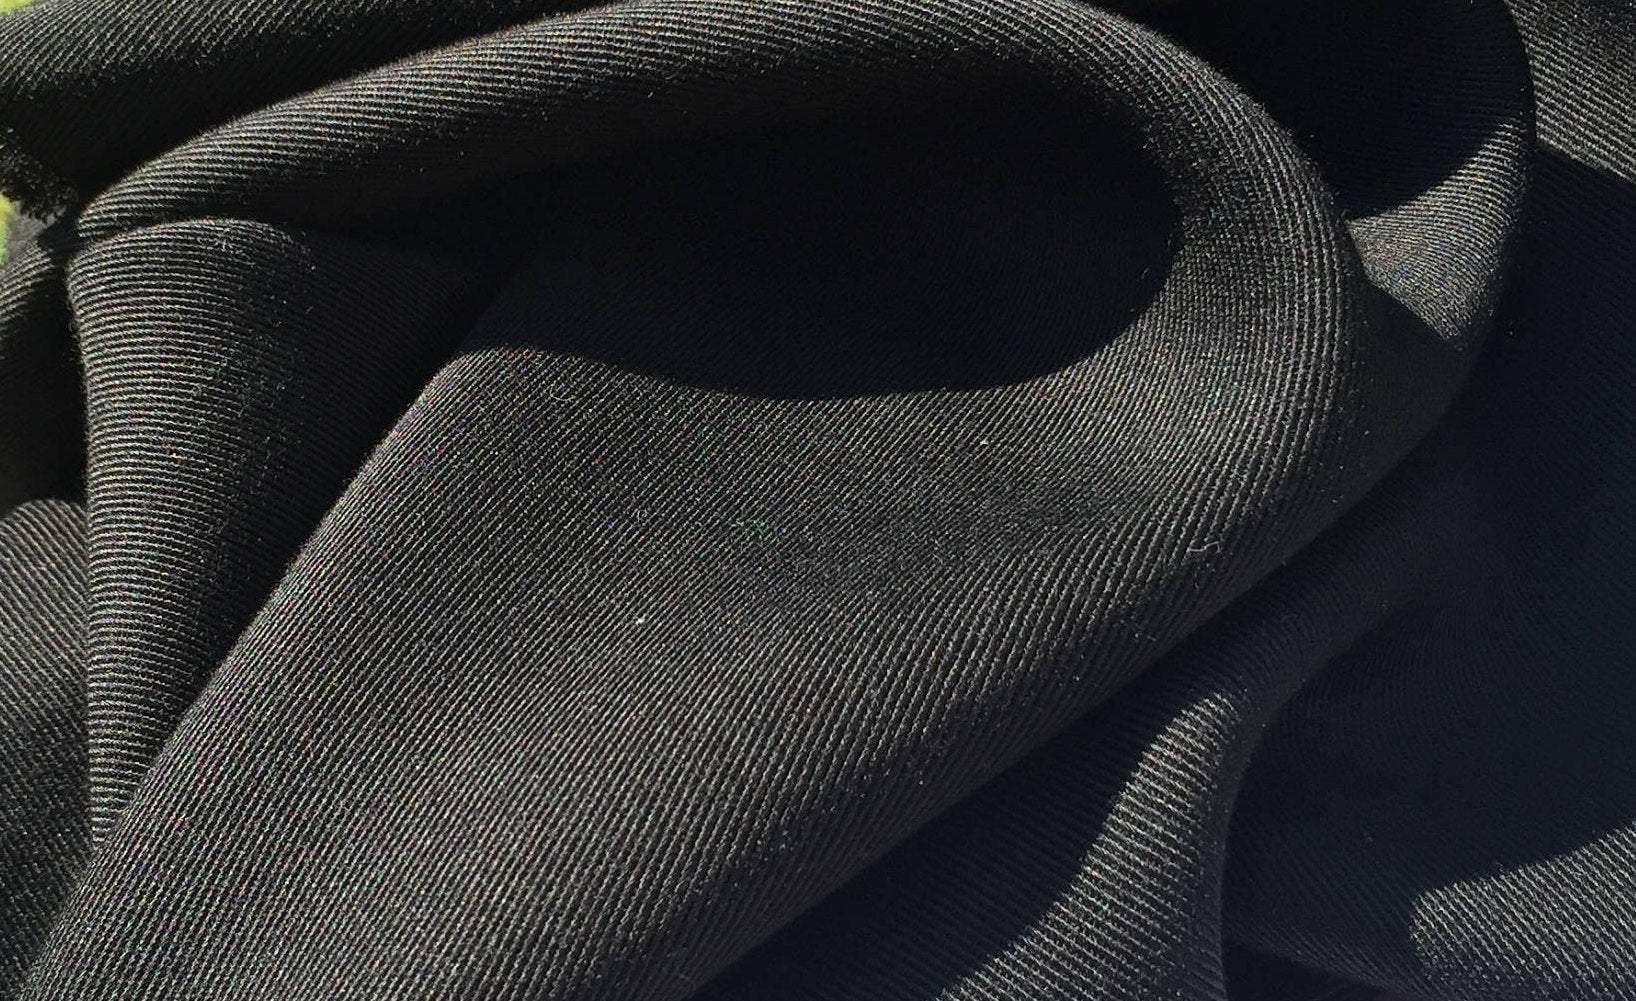 Black Crepe Fabric - 60, By The Yard